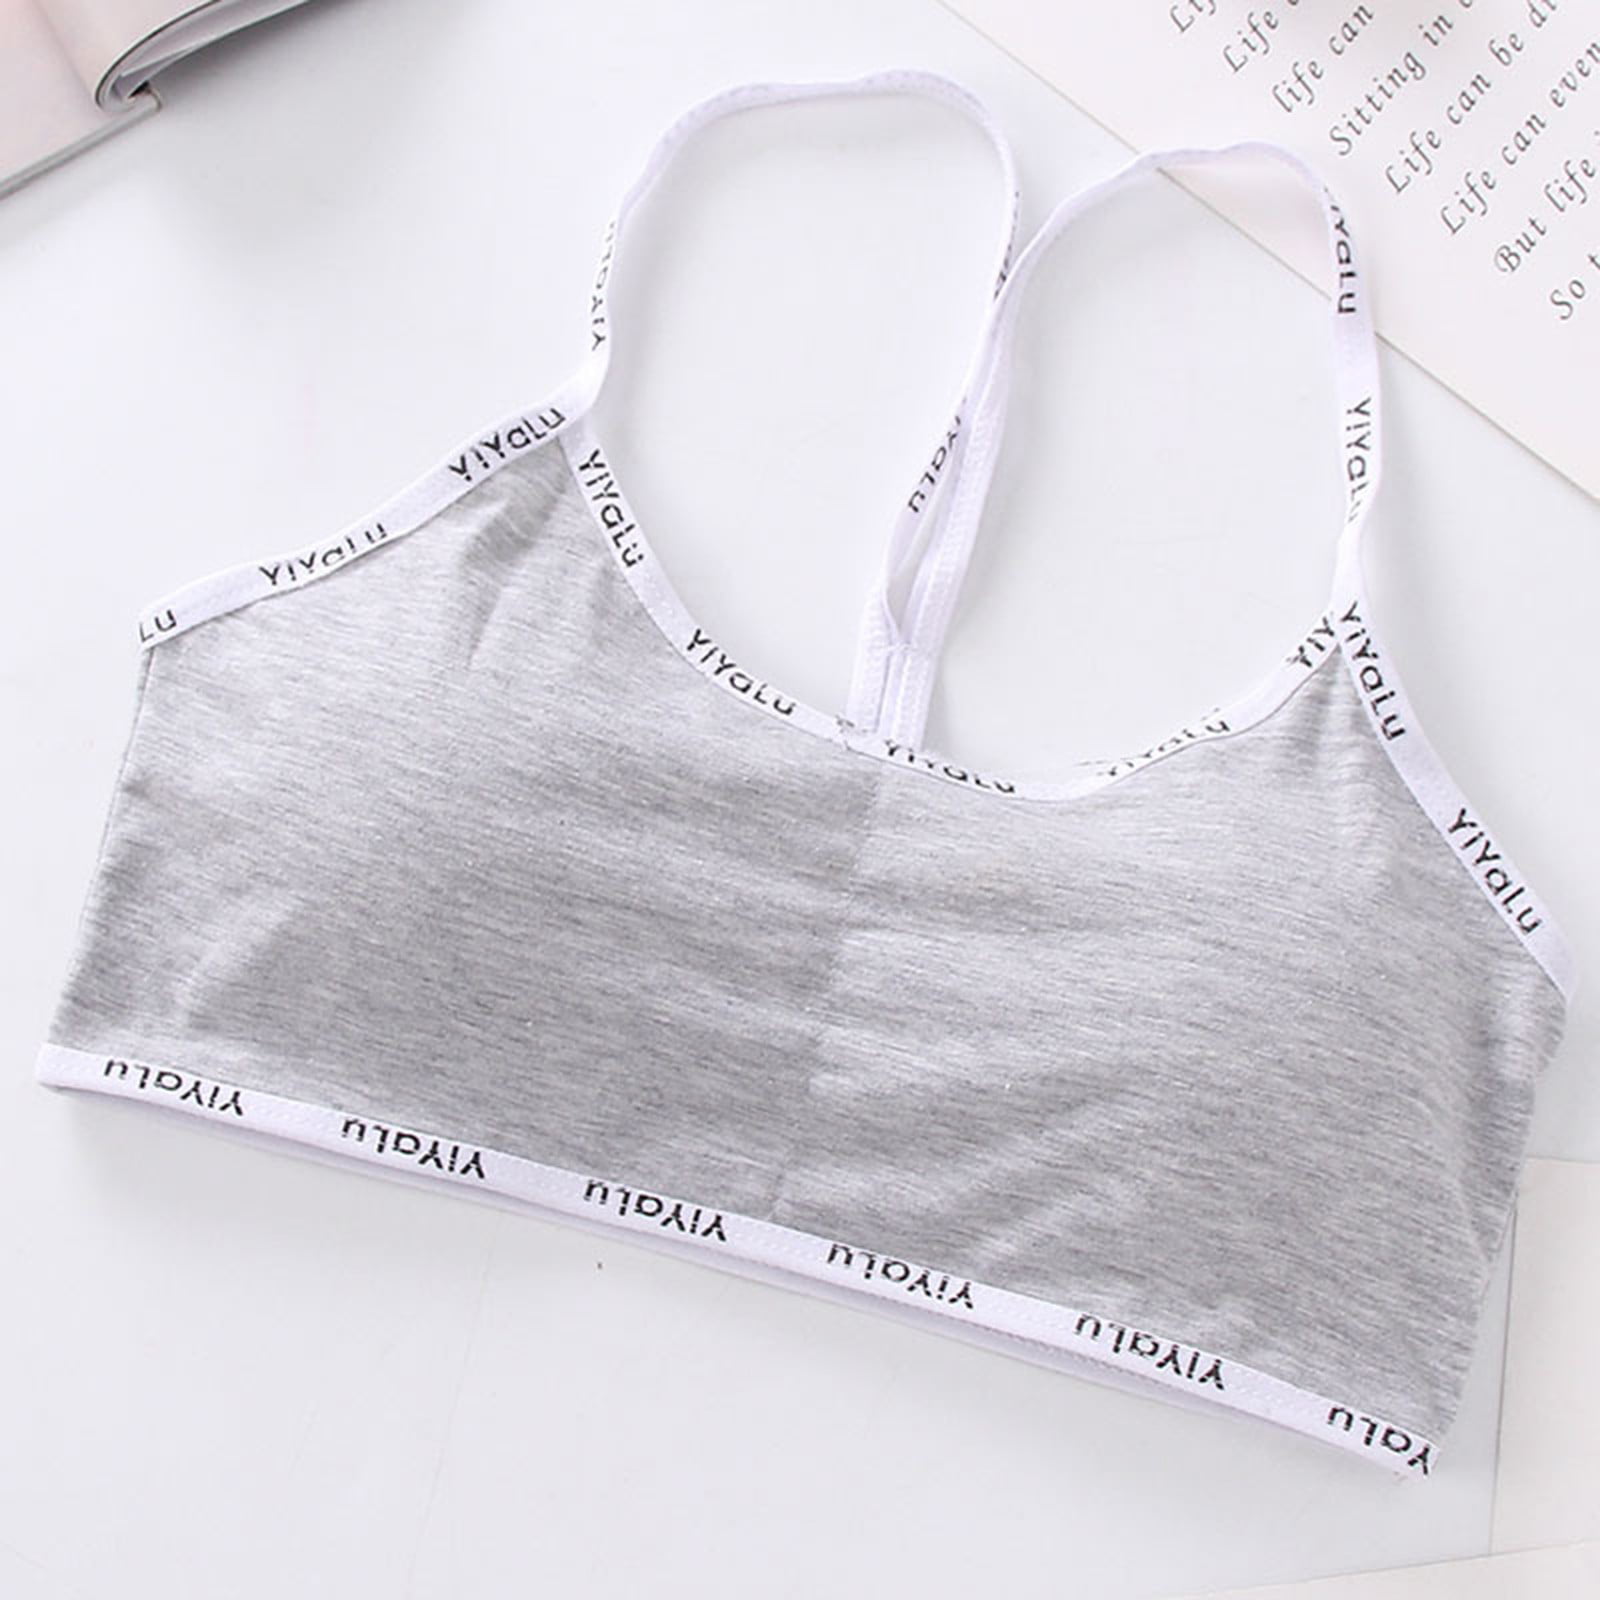 CLZOUD Comfortable Bras Grey Big Girls Student Training Bras Wireless Light  Padded Sports Cropped Cami Bras for Teens Underwear Adjustable Bra Vest  Teenager Underclothes One Size 